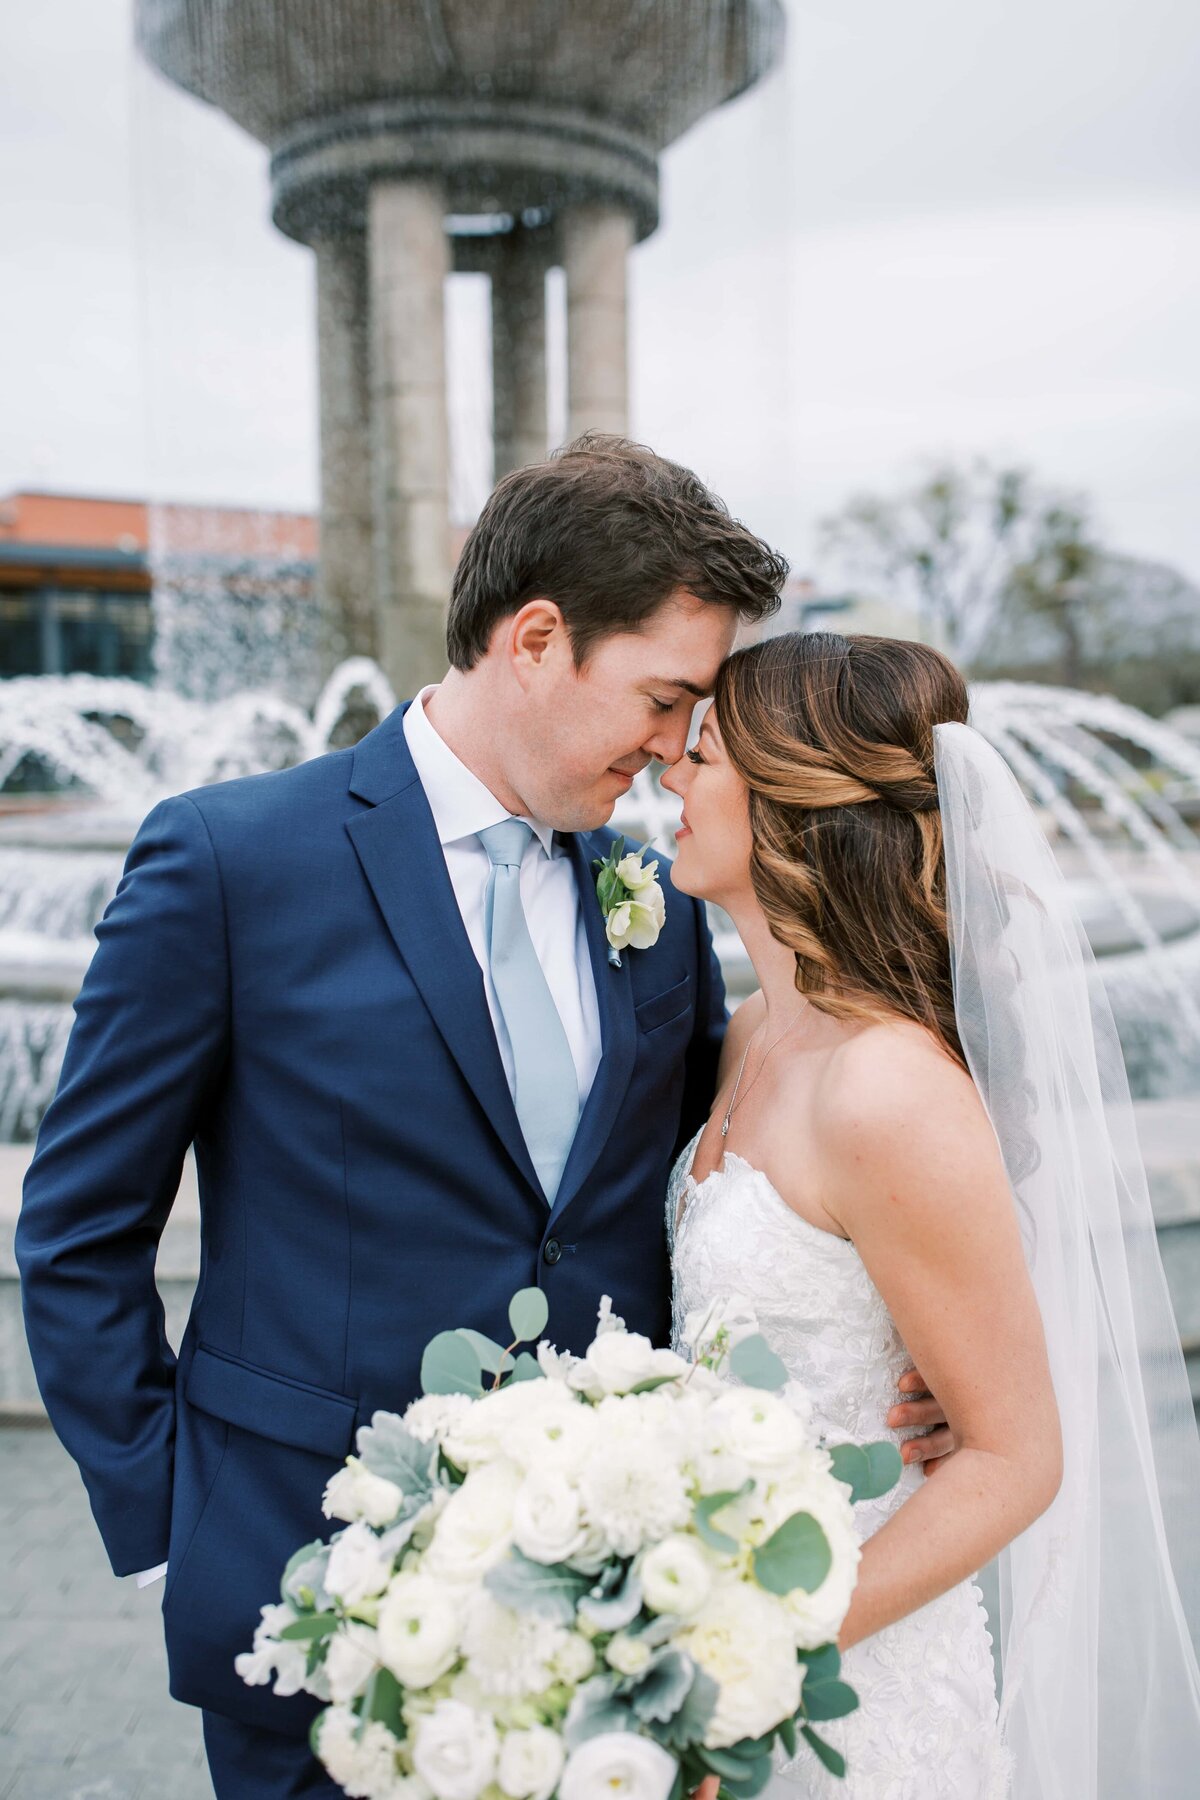 Danielle-Defayette-Photography-Raleigh-Downtown-Cary-NC-Wedding-373